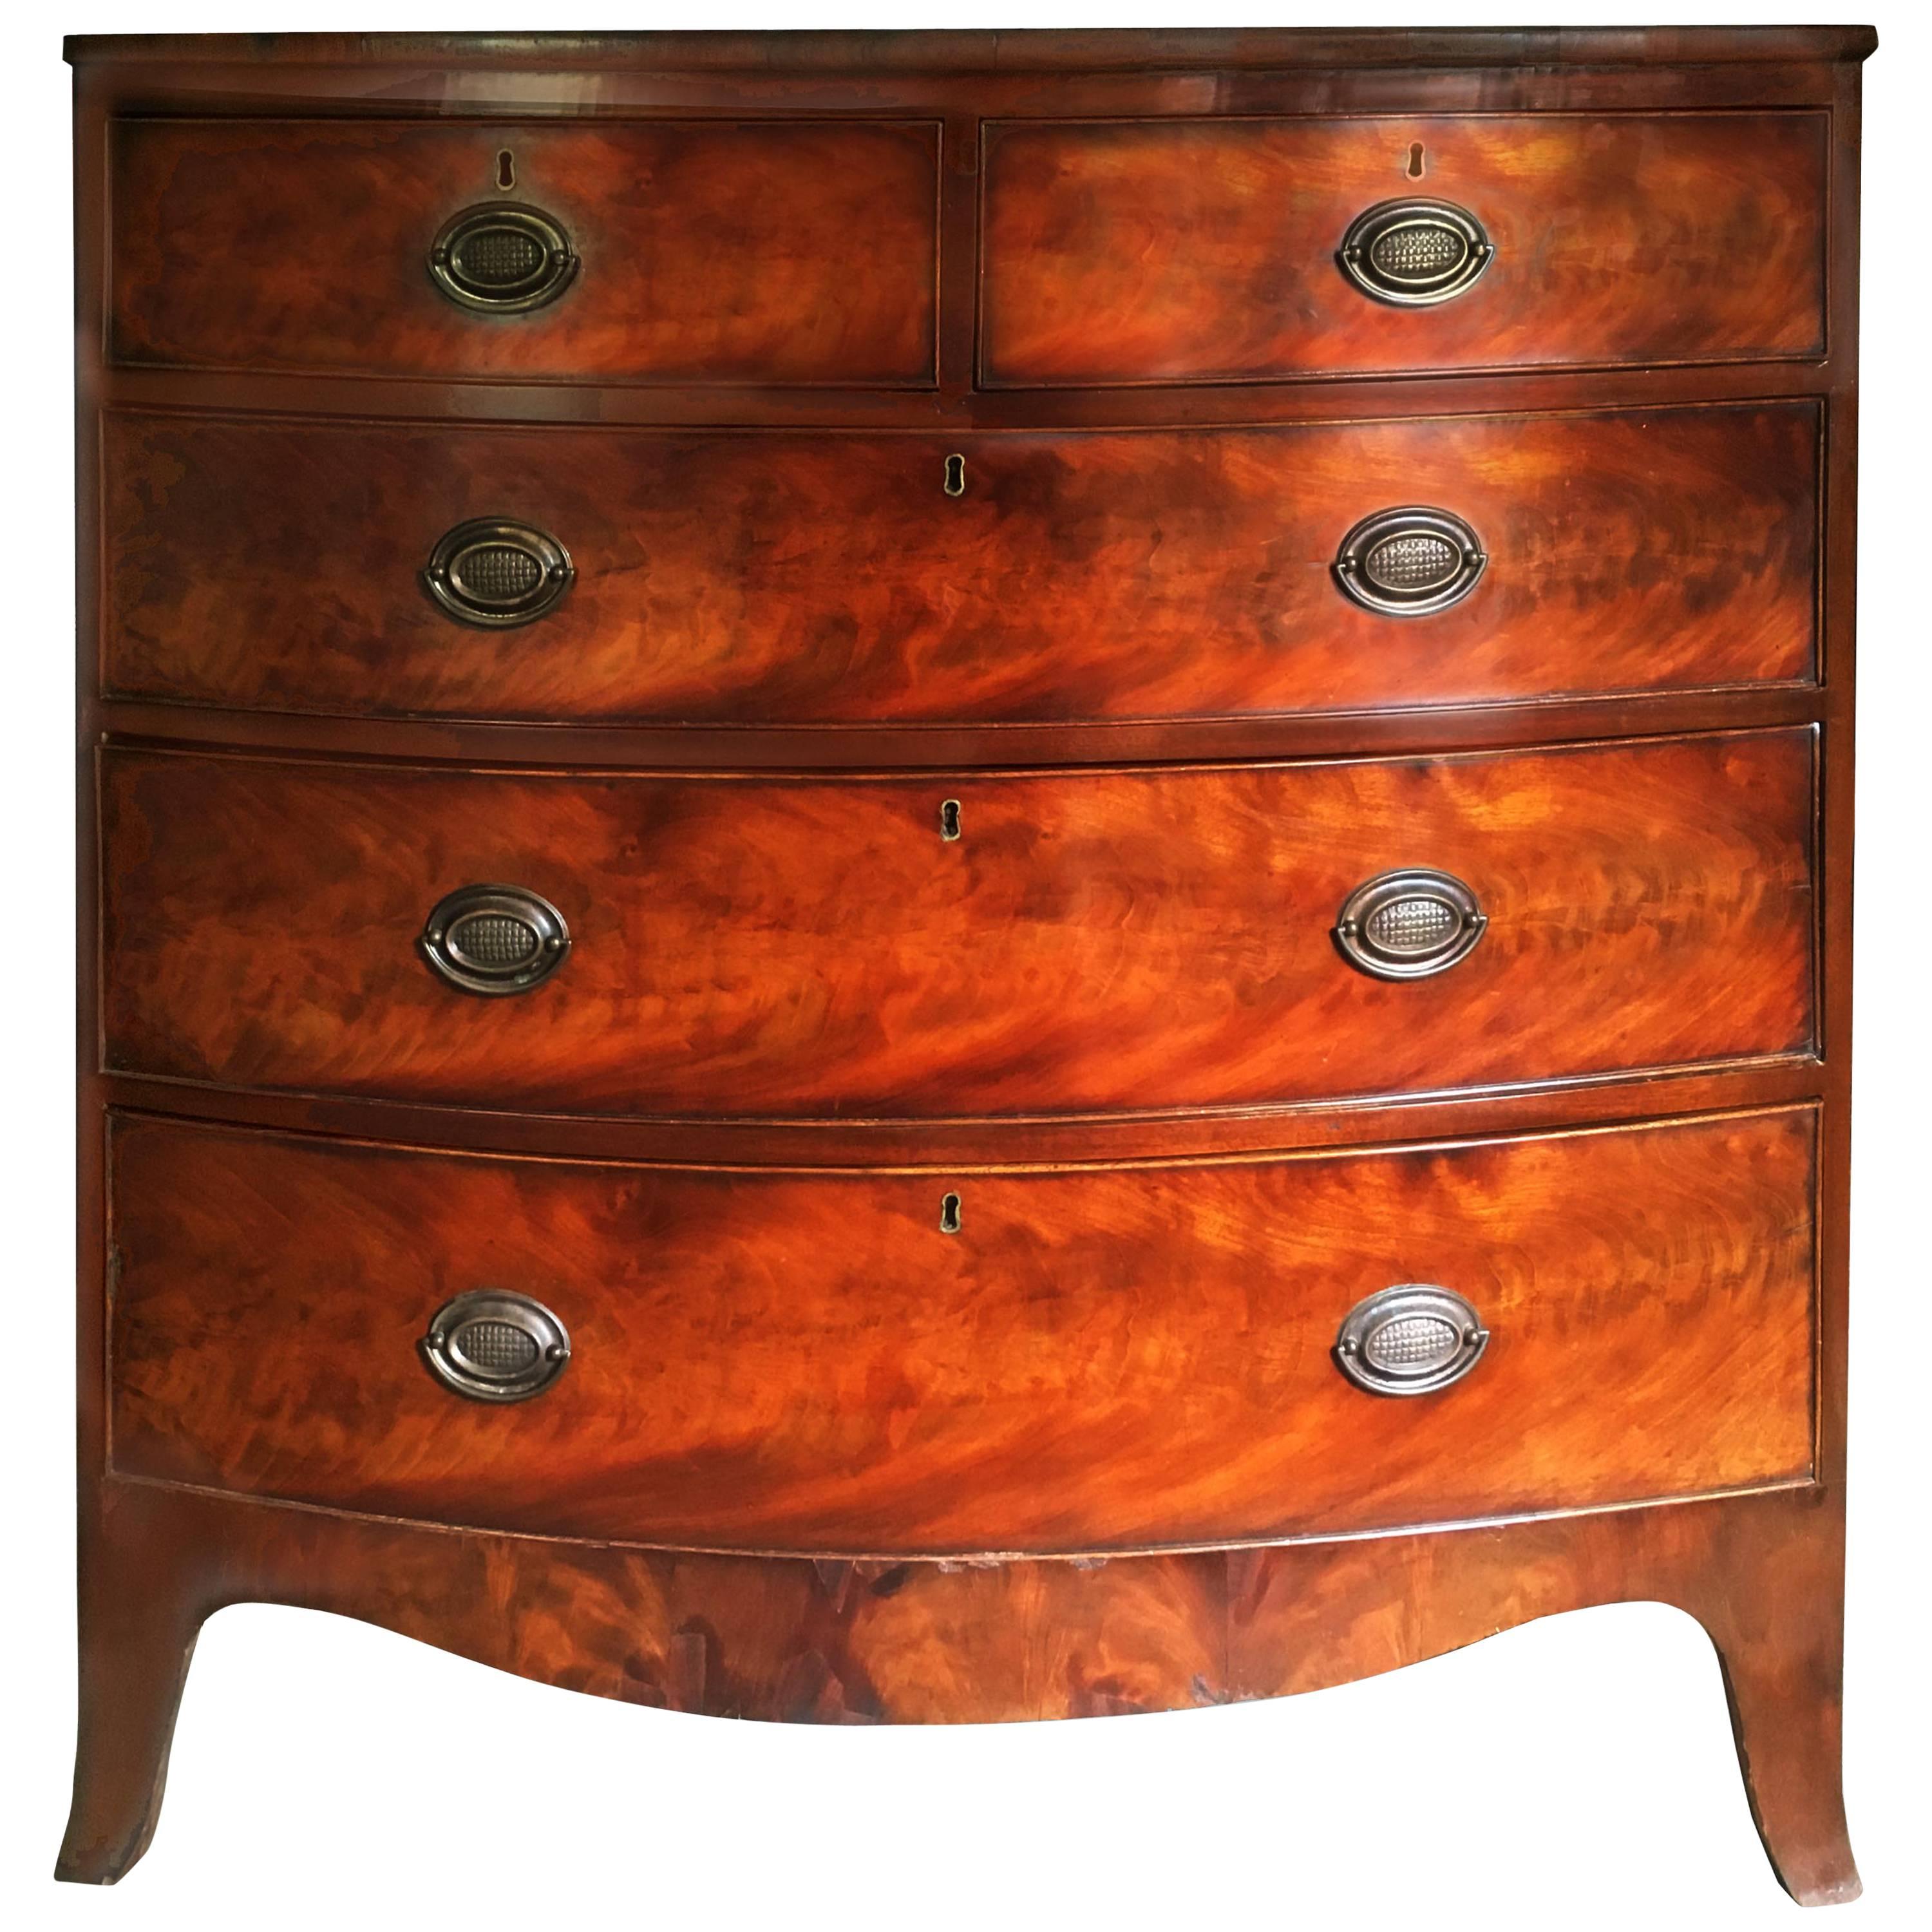 Late 18th Century Georgian Bow Front Chest in Flame Mahogany